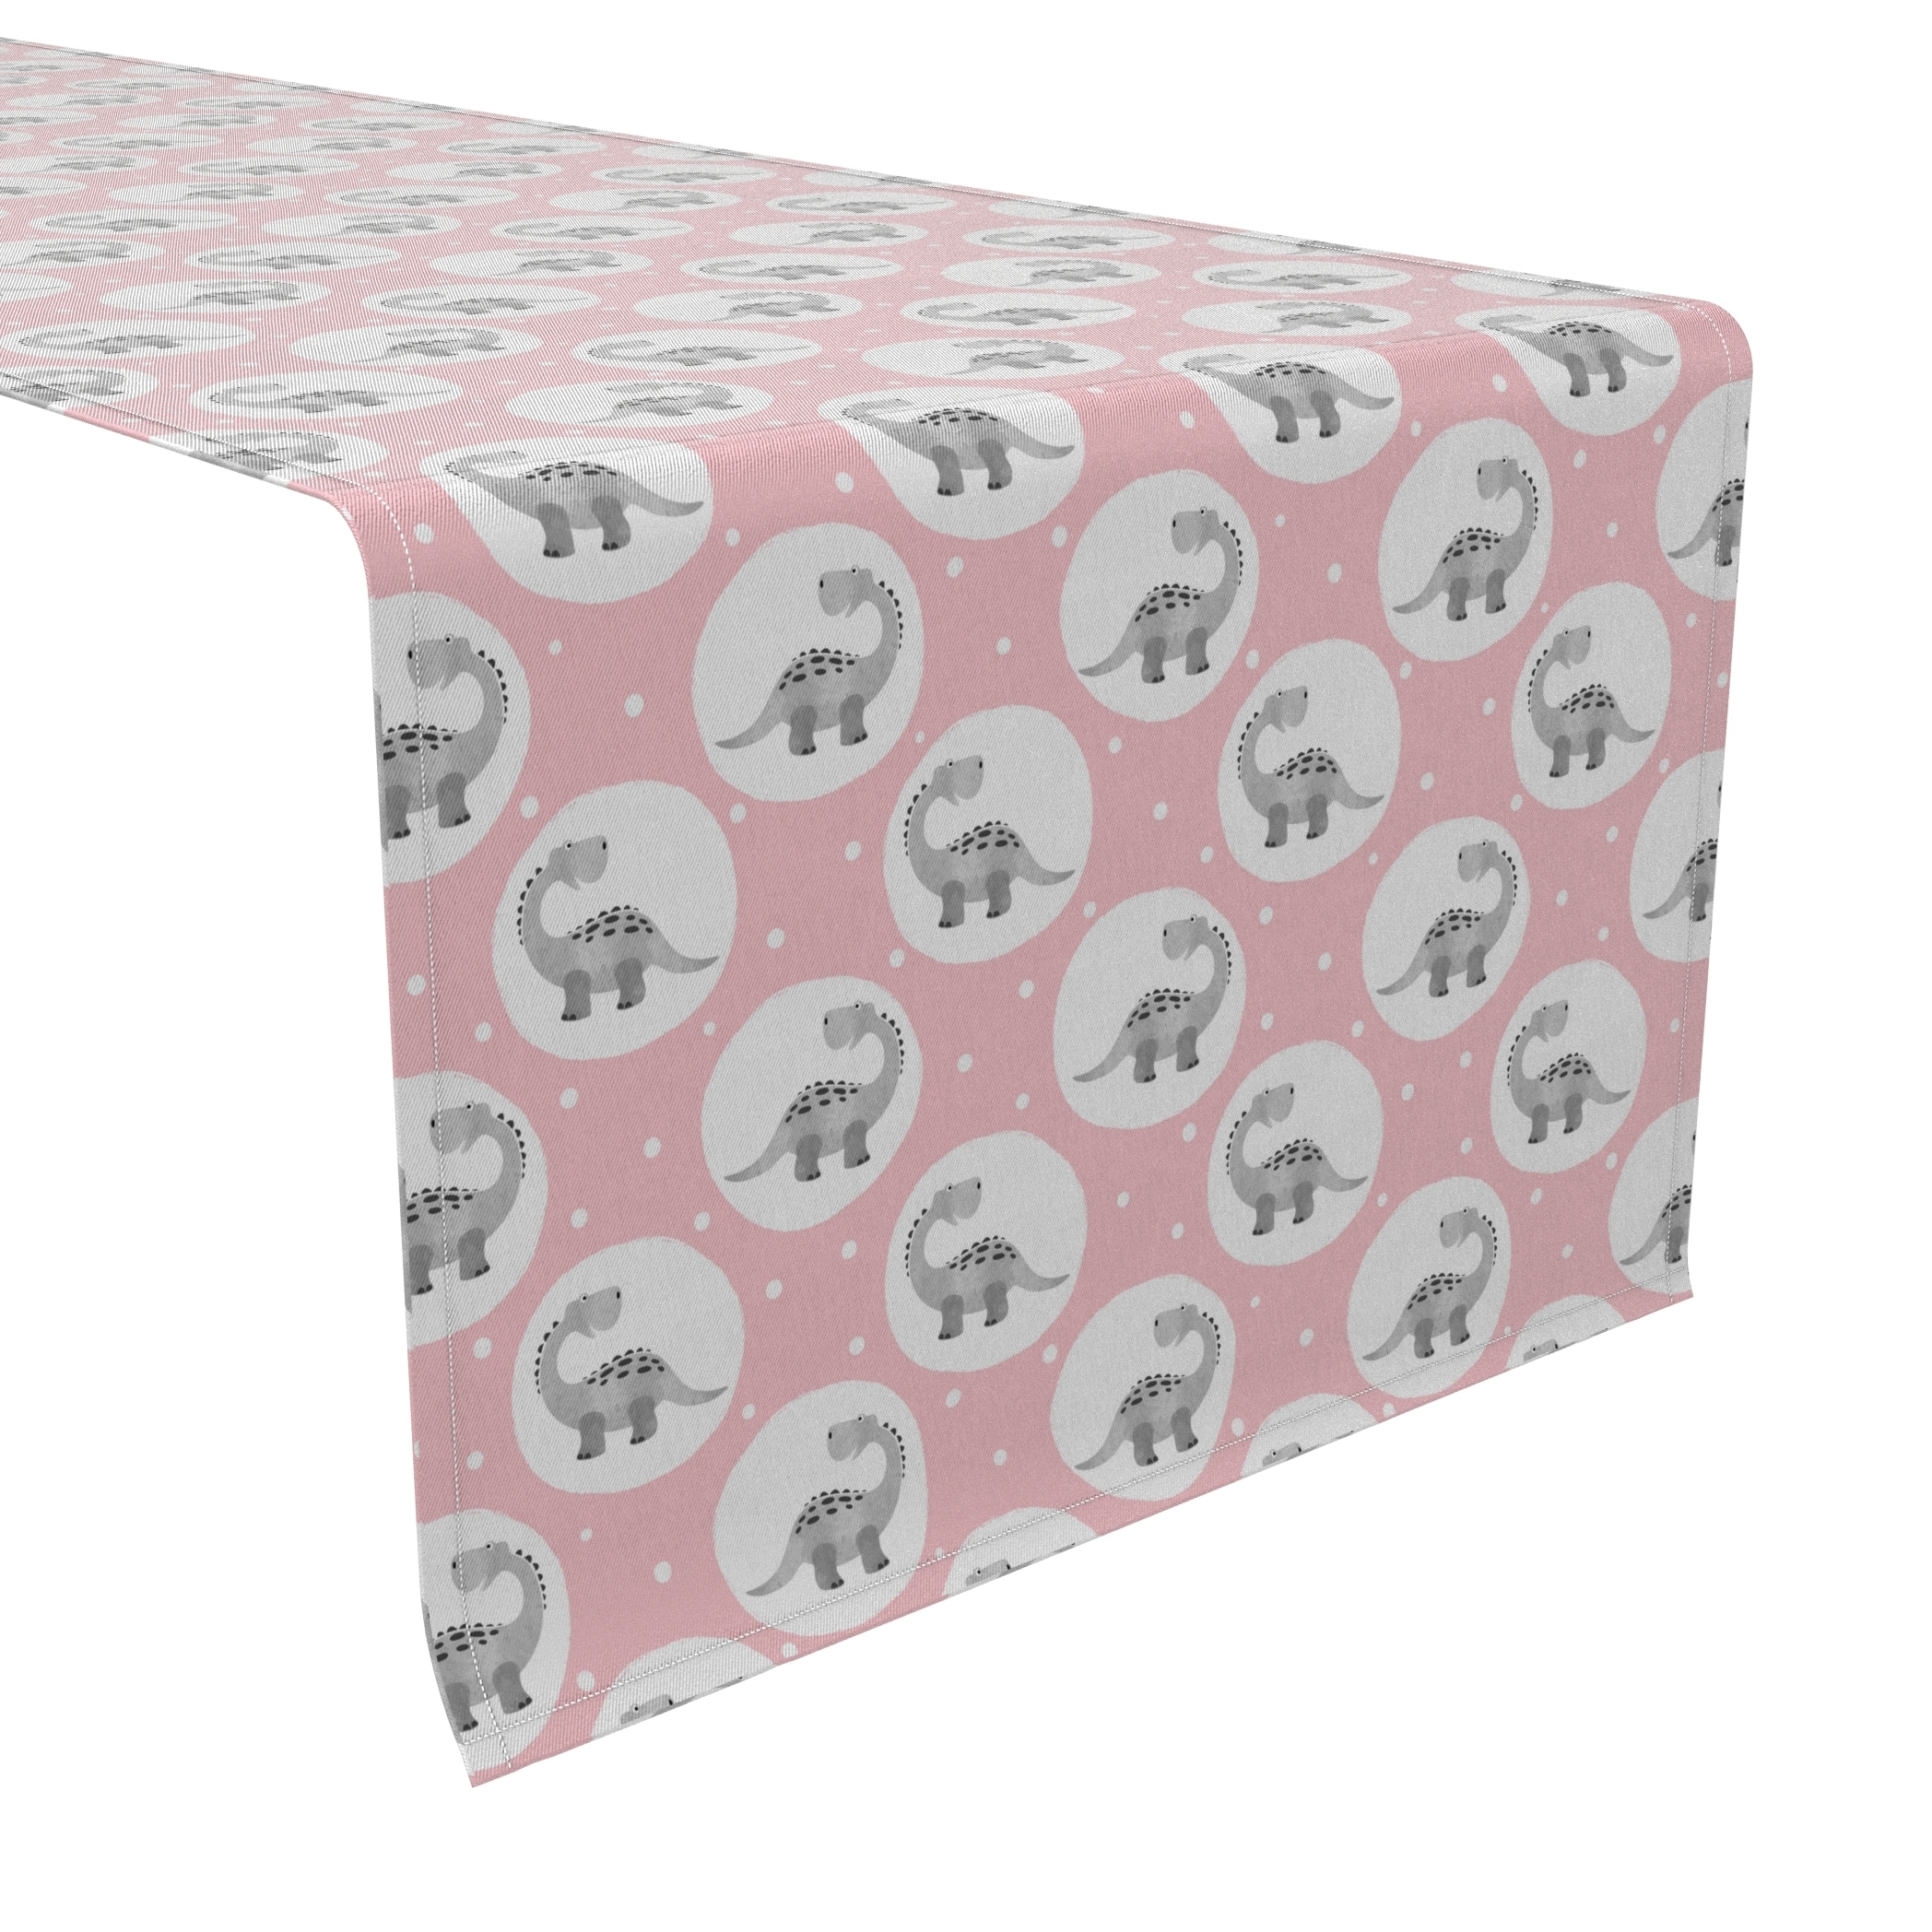 Fabric Textile Products, Inc. Table Runner, 100% Cotton, 16x108", Dinosaur Polka Dots Pink